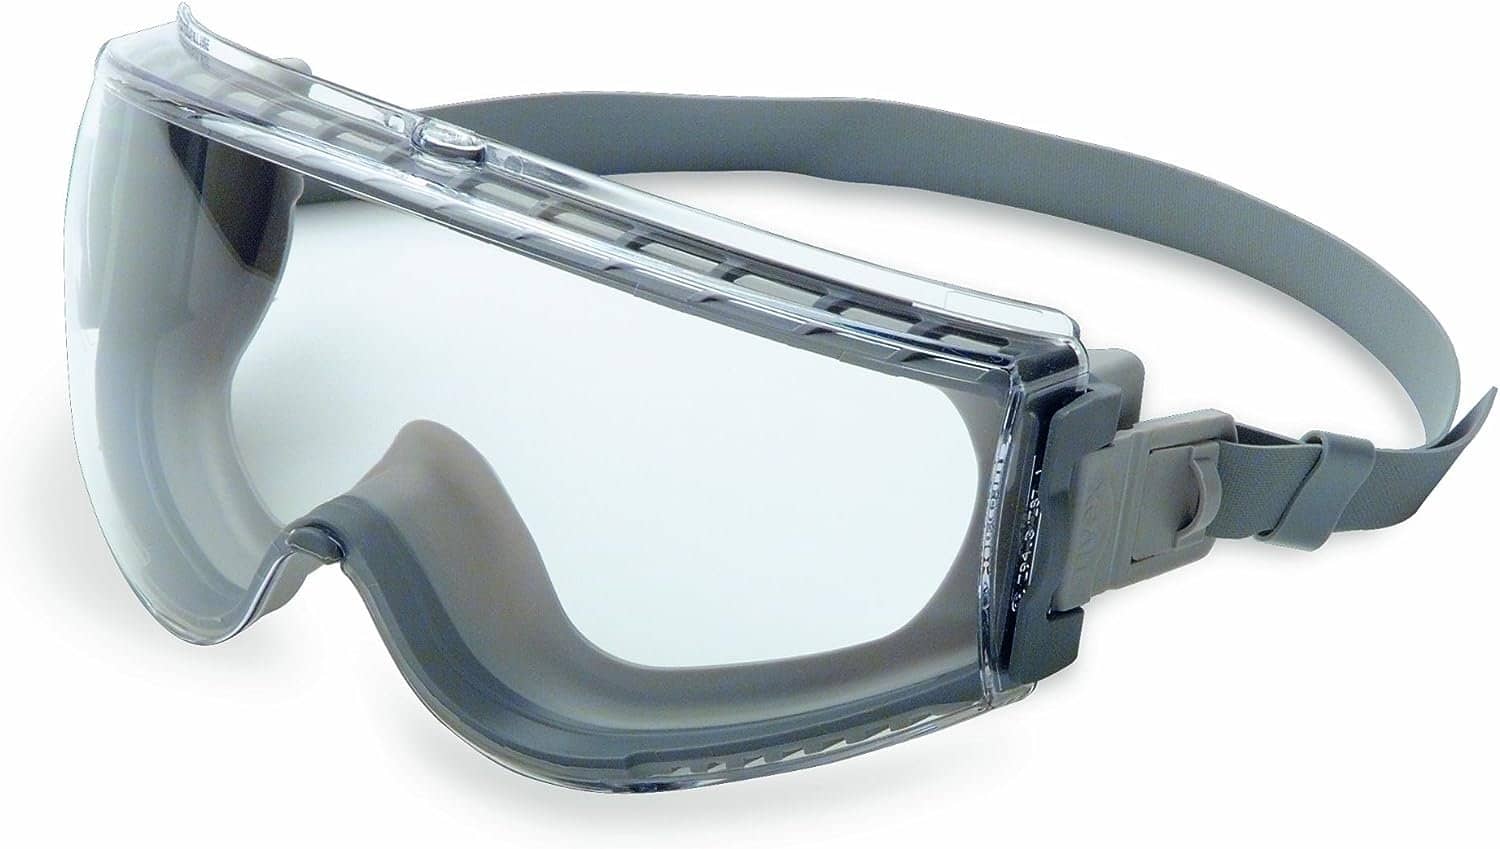 honeywell uvex safety goggles review